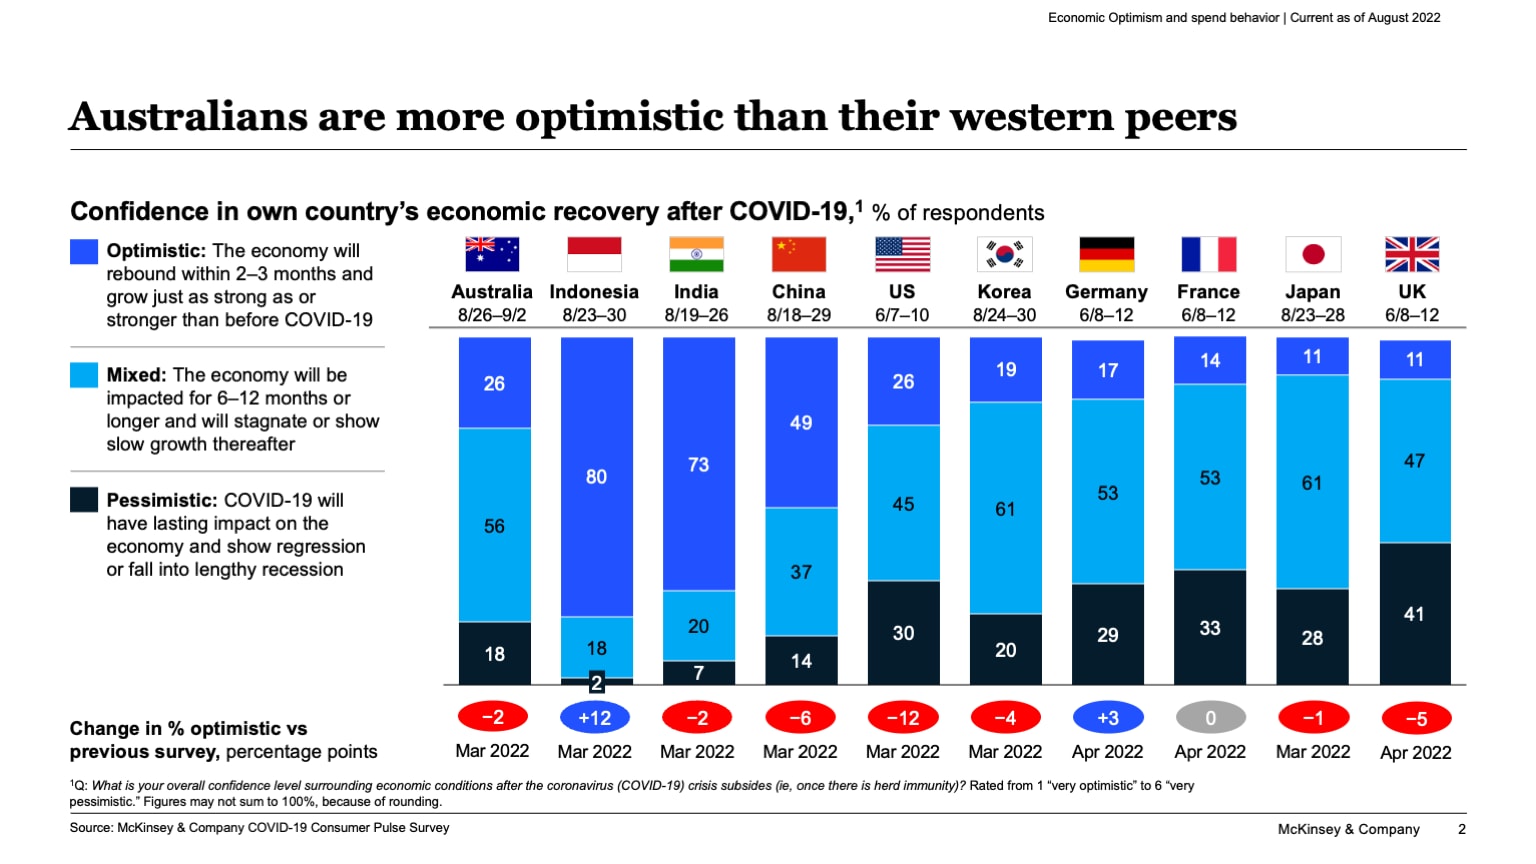 Australians are more optimistic than their western peers